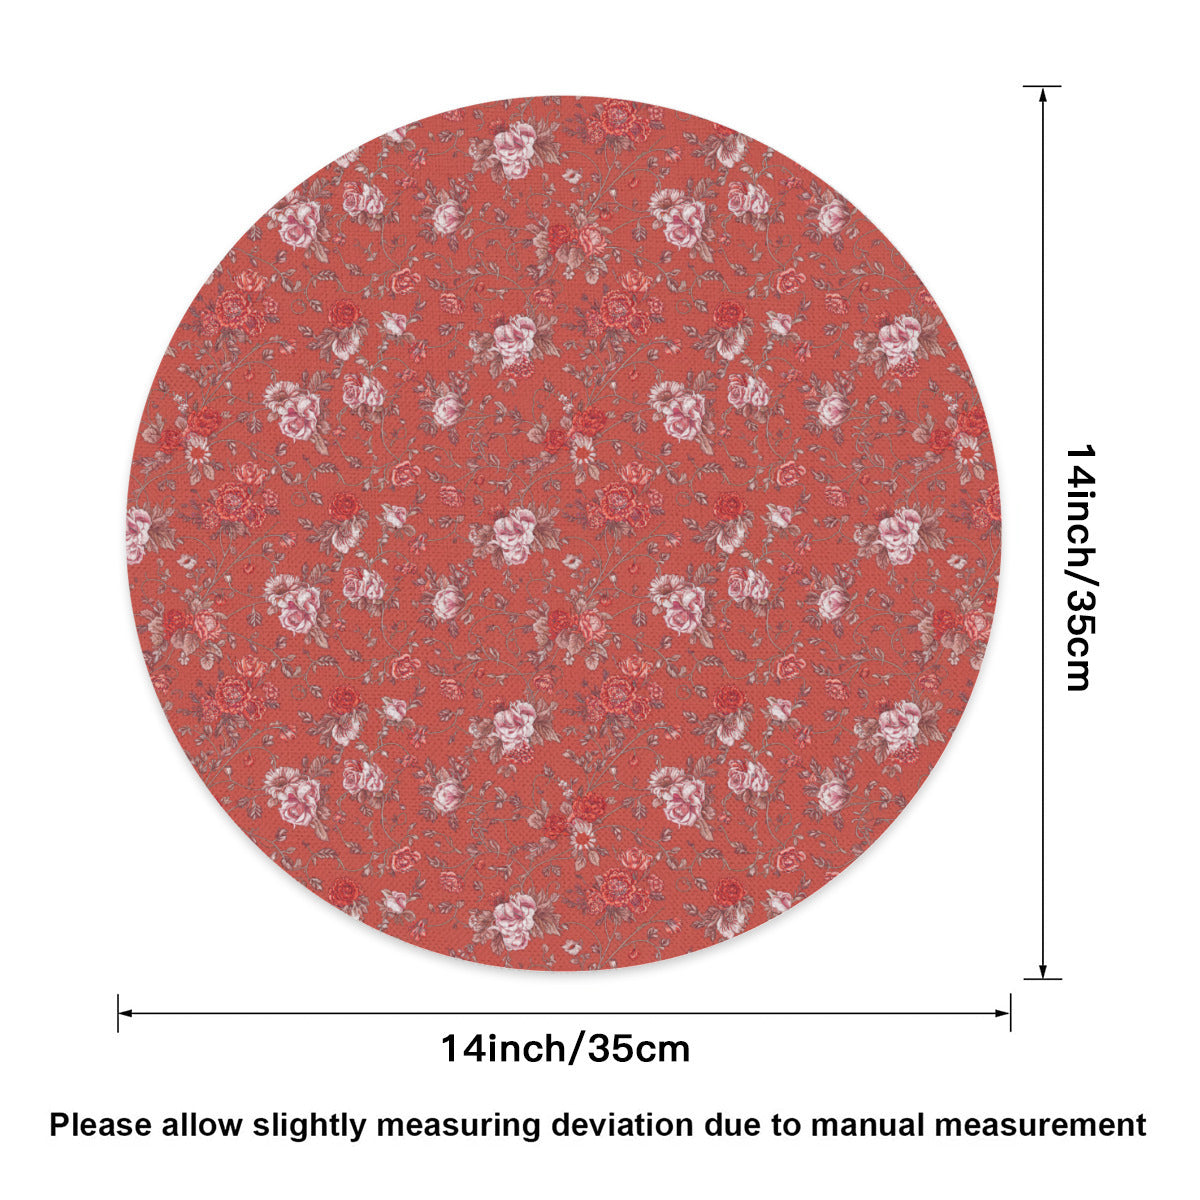 Vampire Art Retro Linen Round Placemats - Red Floral